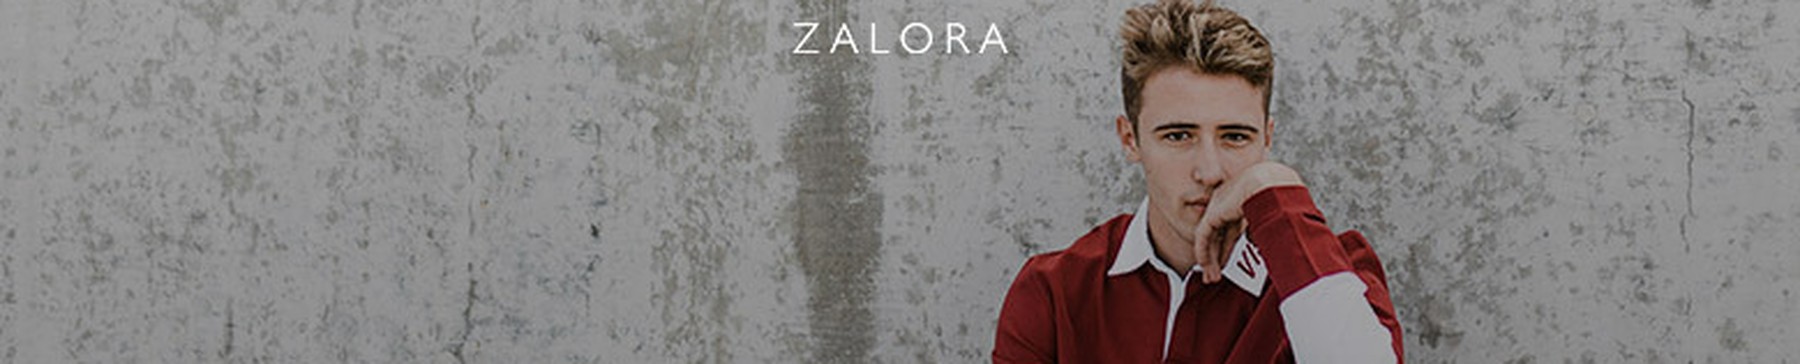 Save more on Zalora! Up to 30% off on fashion